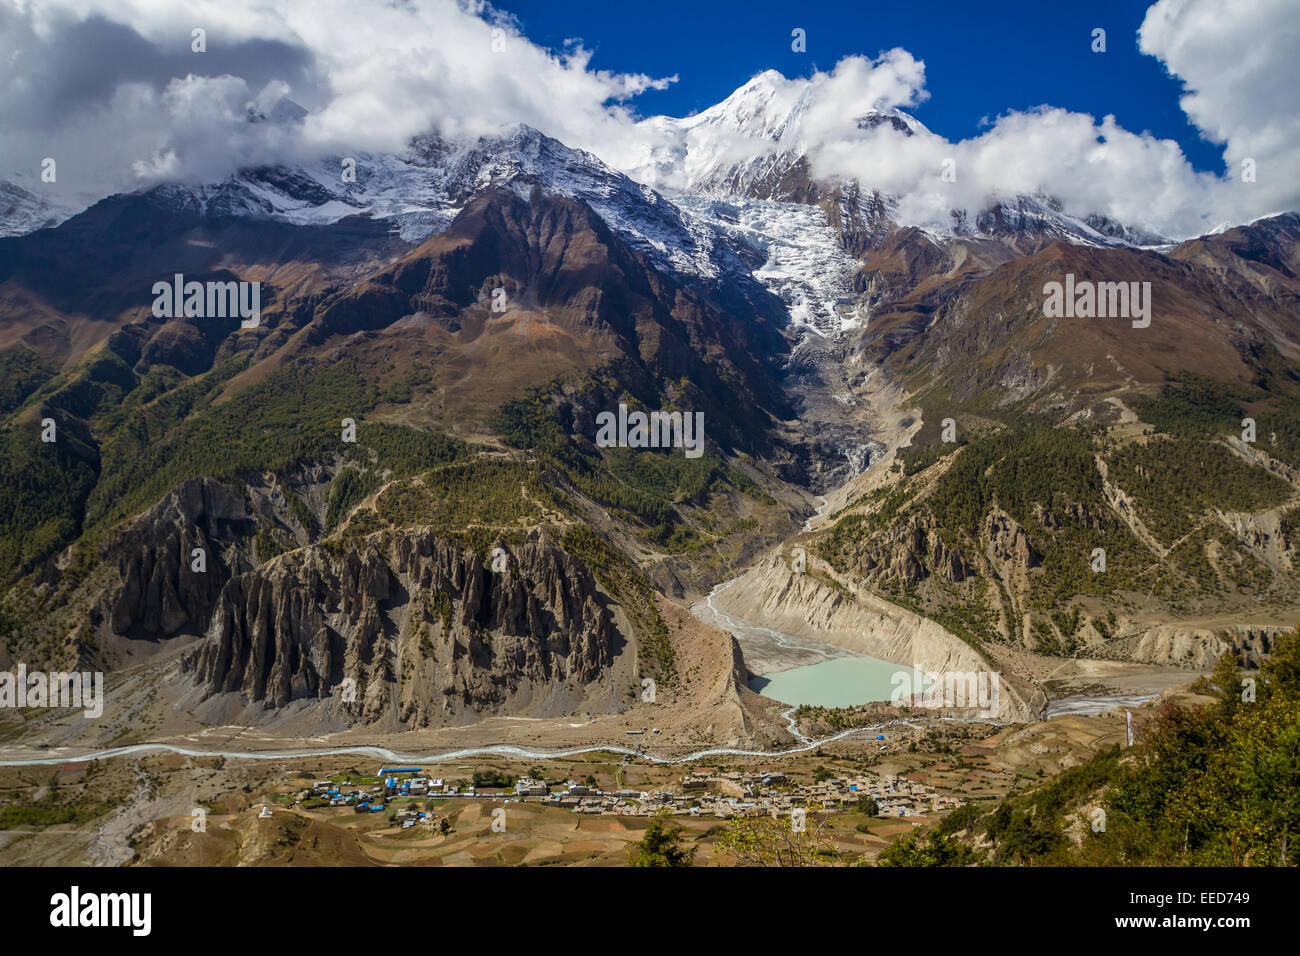 In the Himalayas of Nepal, the peak of Ganga Purna and the Annapurna Mastif loom high over the village of Manang. Stock Photo